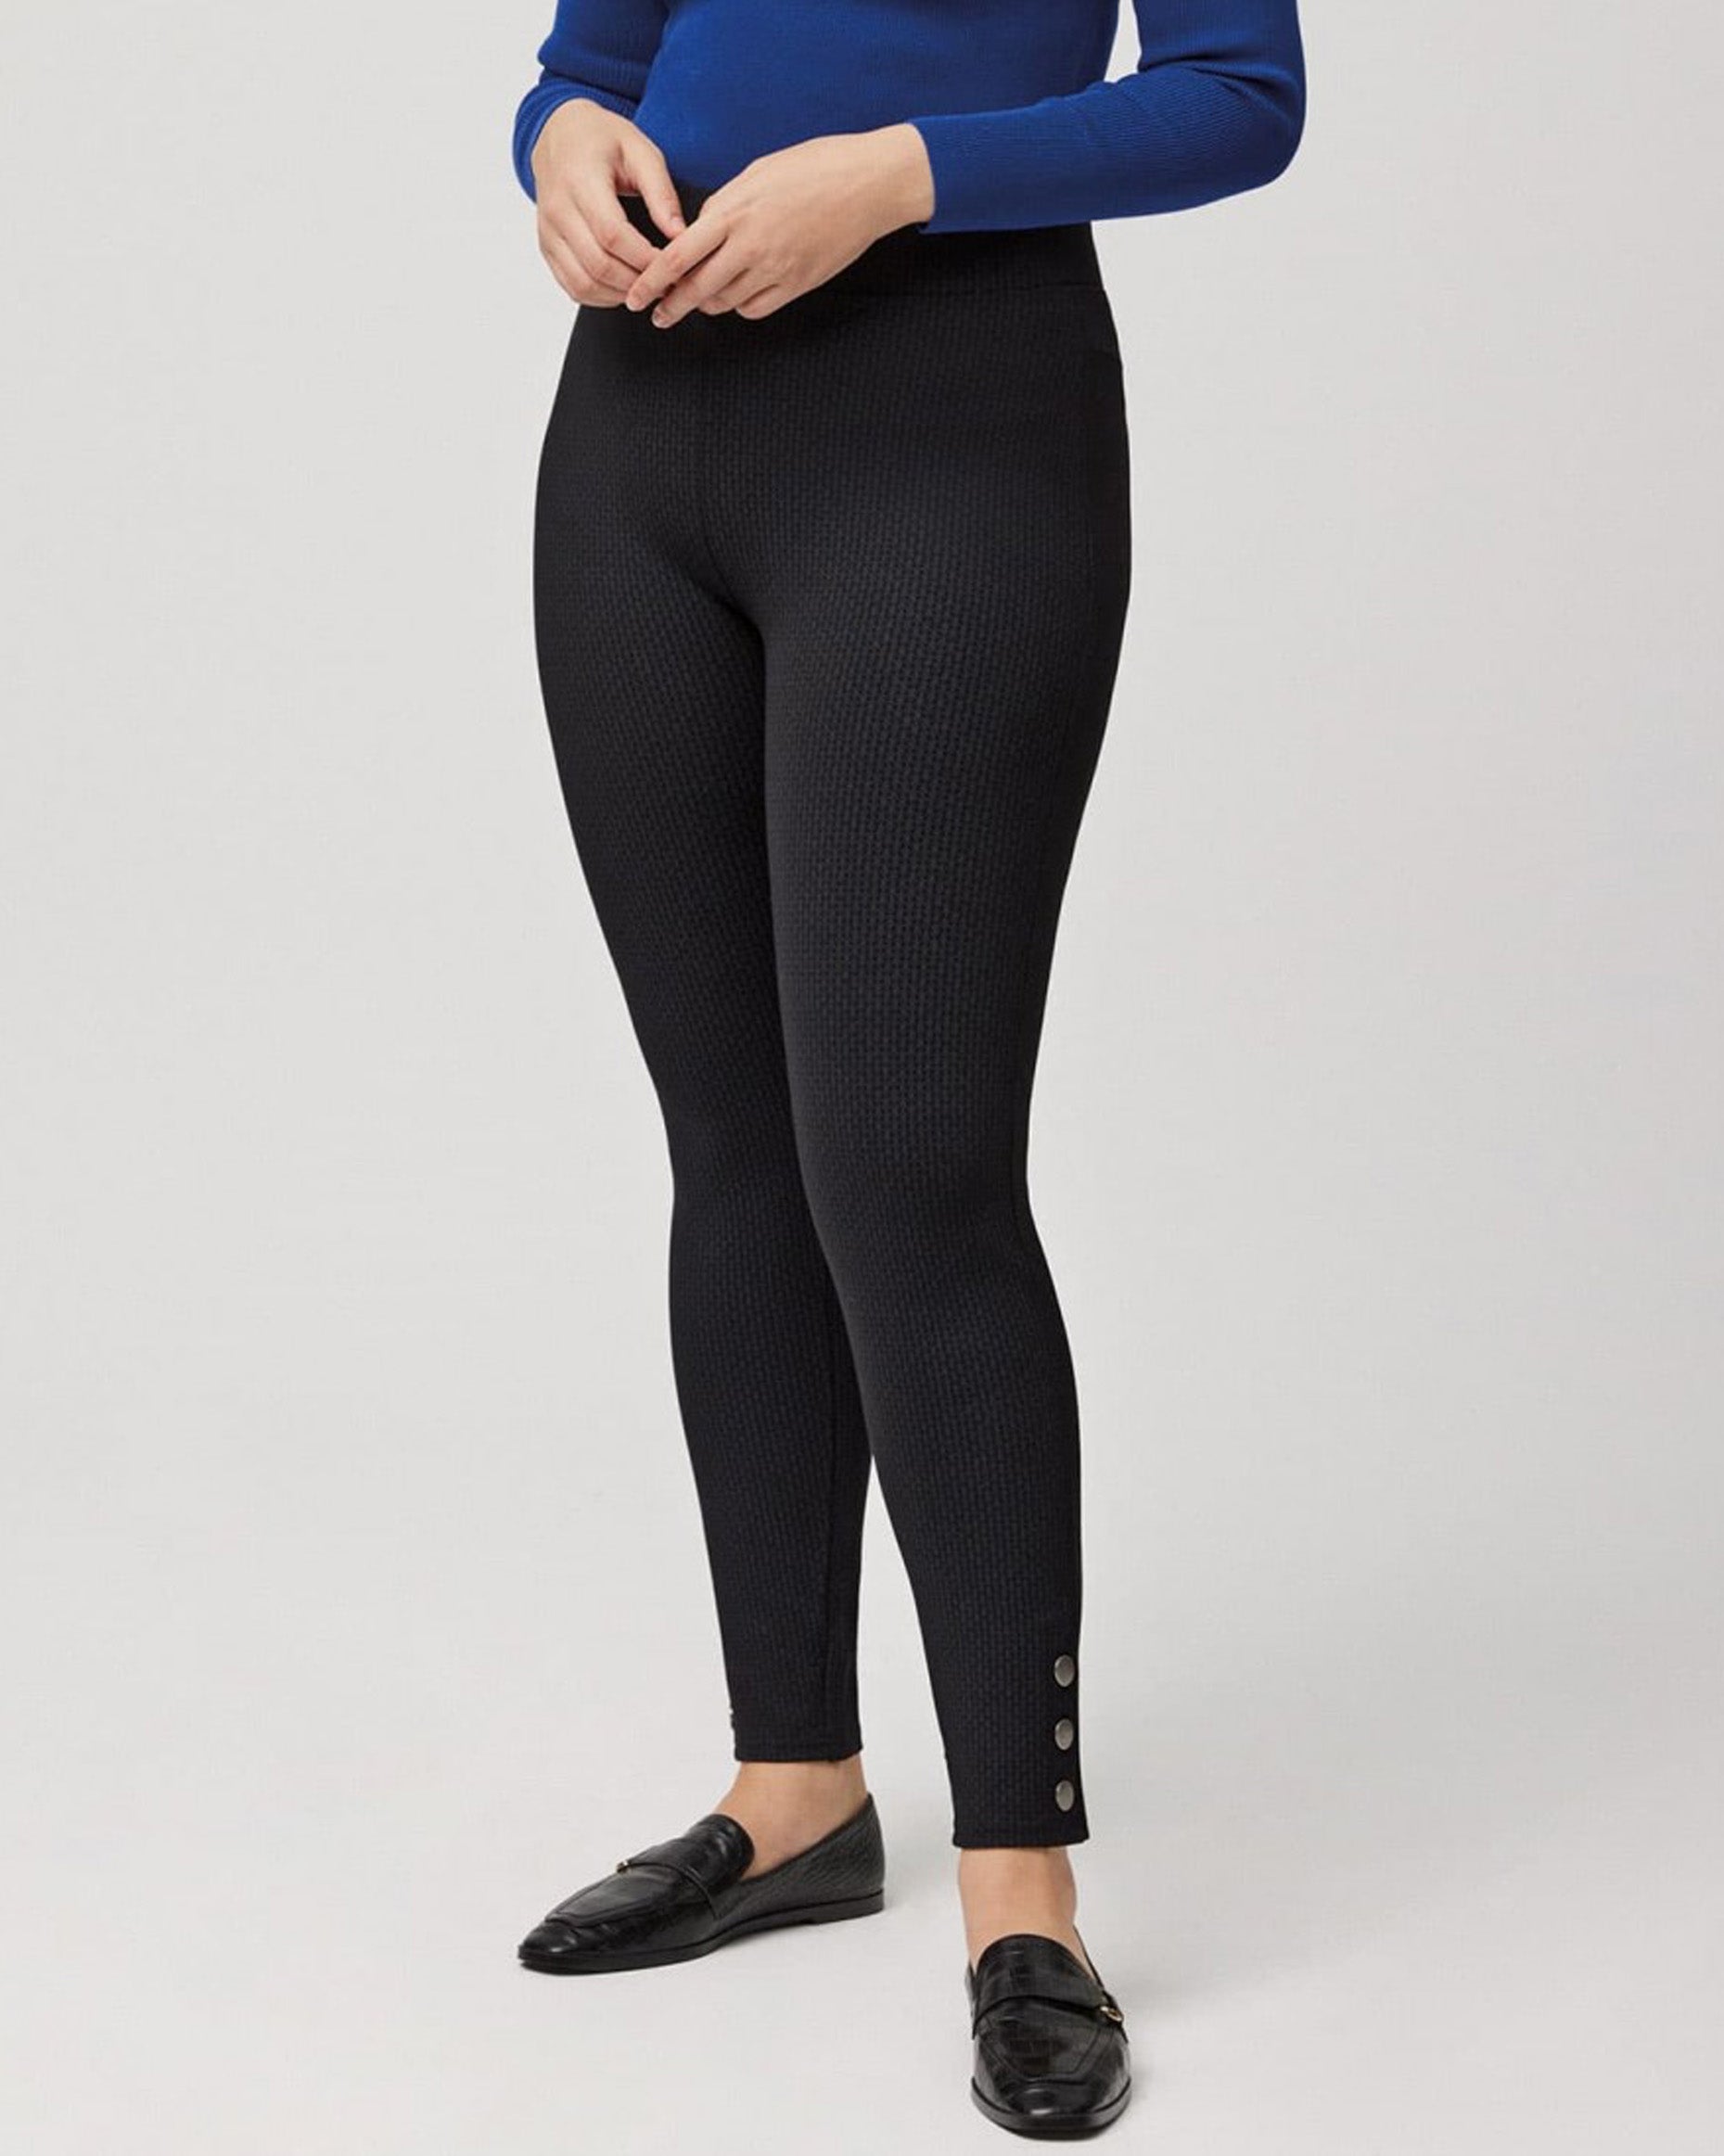 Ysabel Mora 70154 Geometric Leggings - Black trouser leggings with a subtle diamond jacquard pattern in grey and dull metal circular button studs at the cuffs.